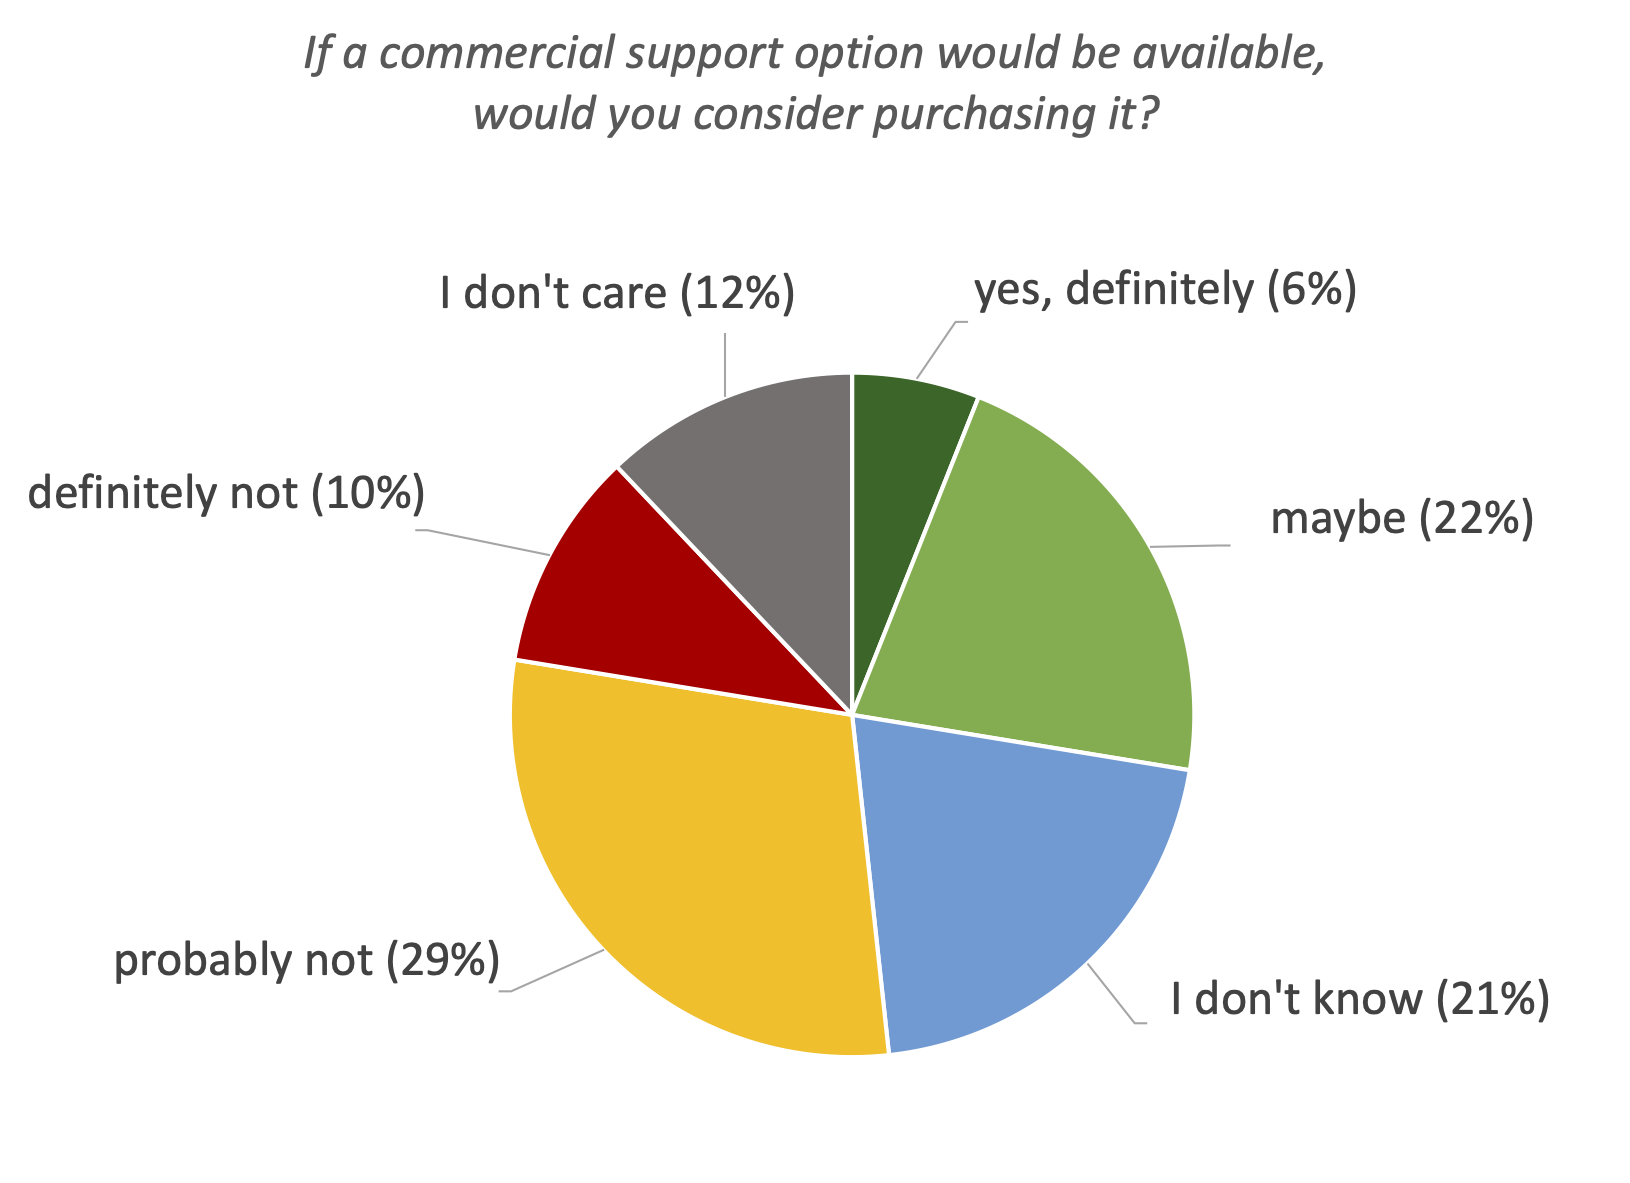 47. If a commercial support option would be available, would you consider purchasing it?